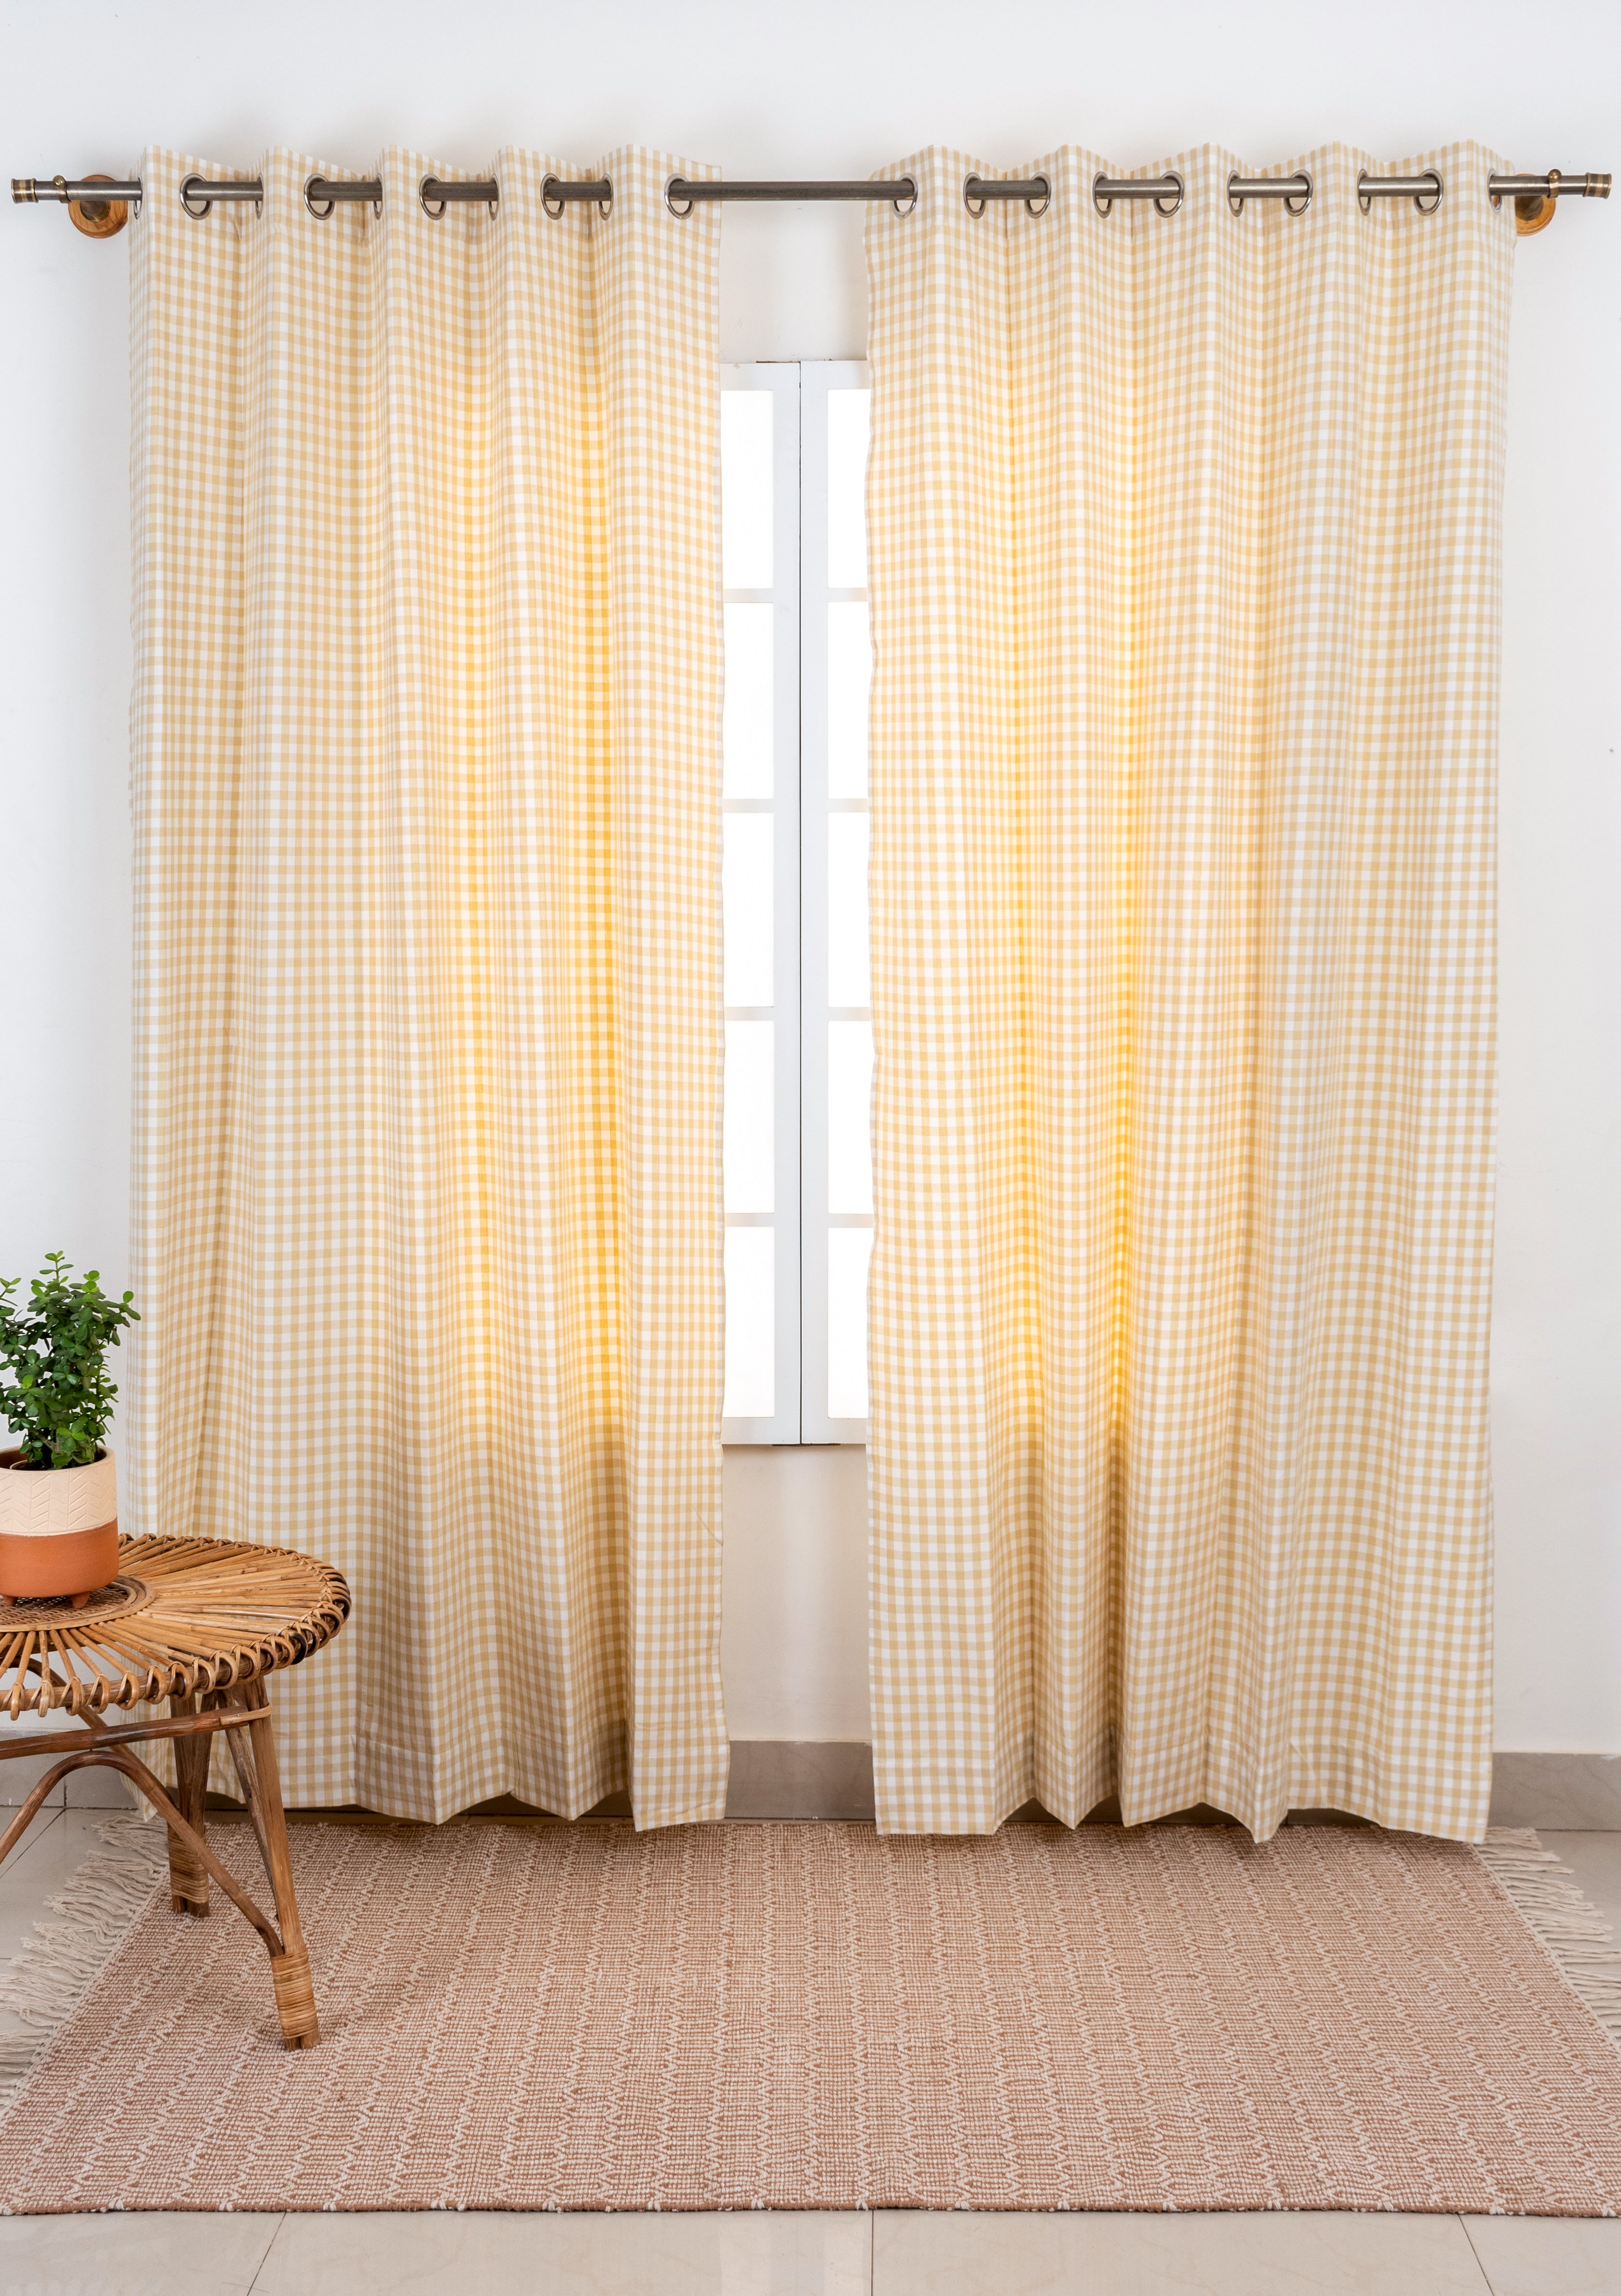 Gingham Woven 100% Customizable Cotton geometric curtain for living room - Room darkening - Ivory